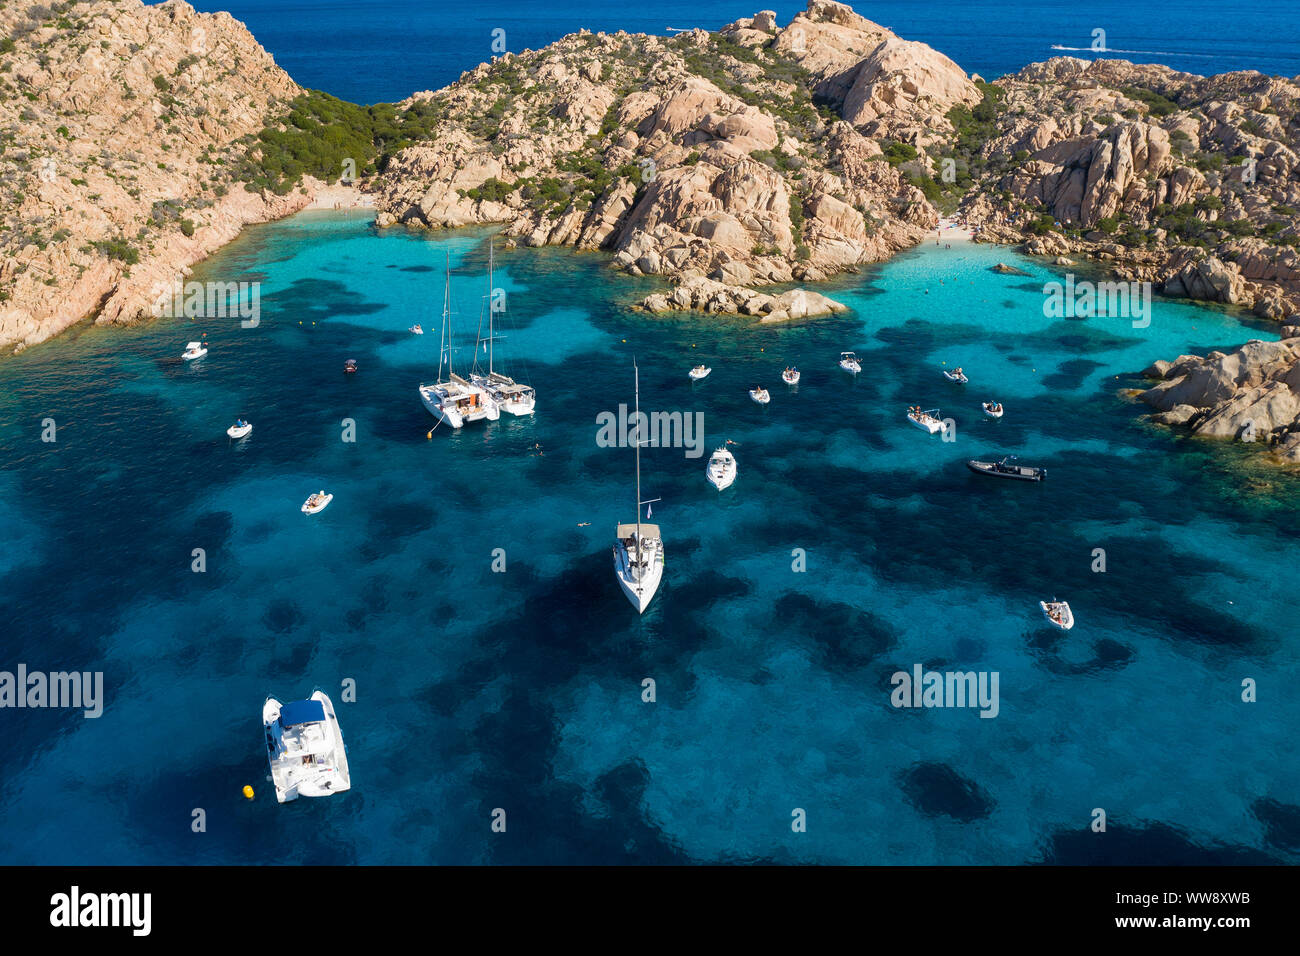 View from above, Stunning aerial view of Cala Coticcio also known as Tahiti with its rocky coasts and small beaches bathed by a turquoise clear water. Stock Photo